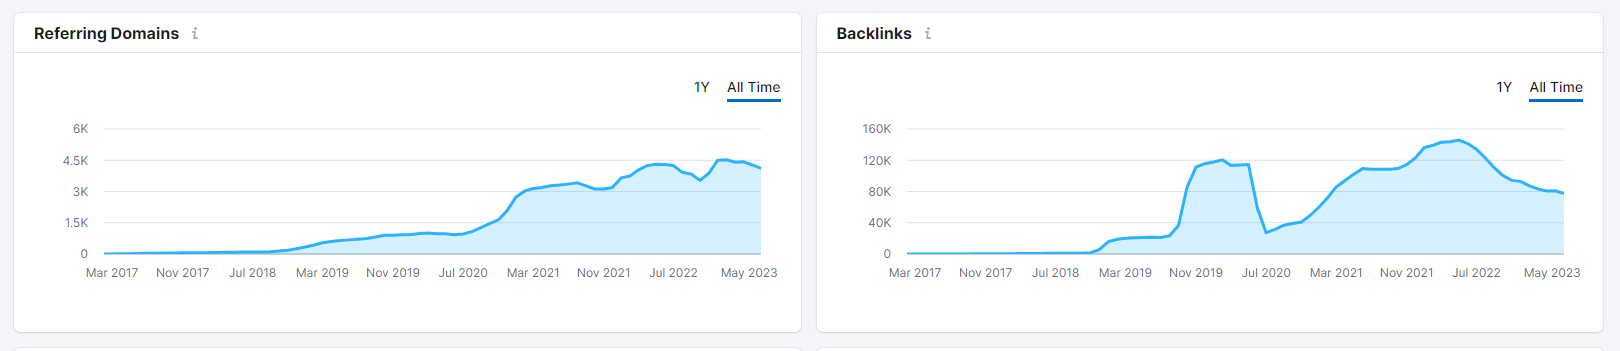 Referring Domain & Backlink Growth